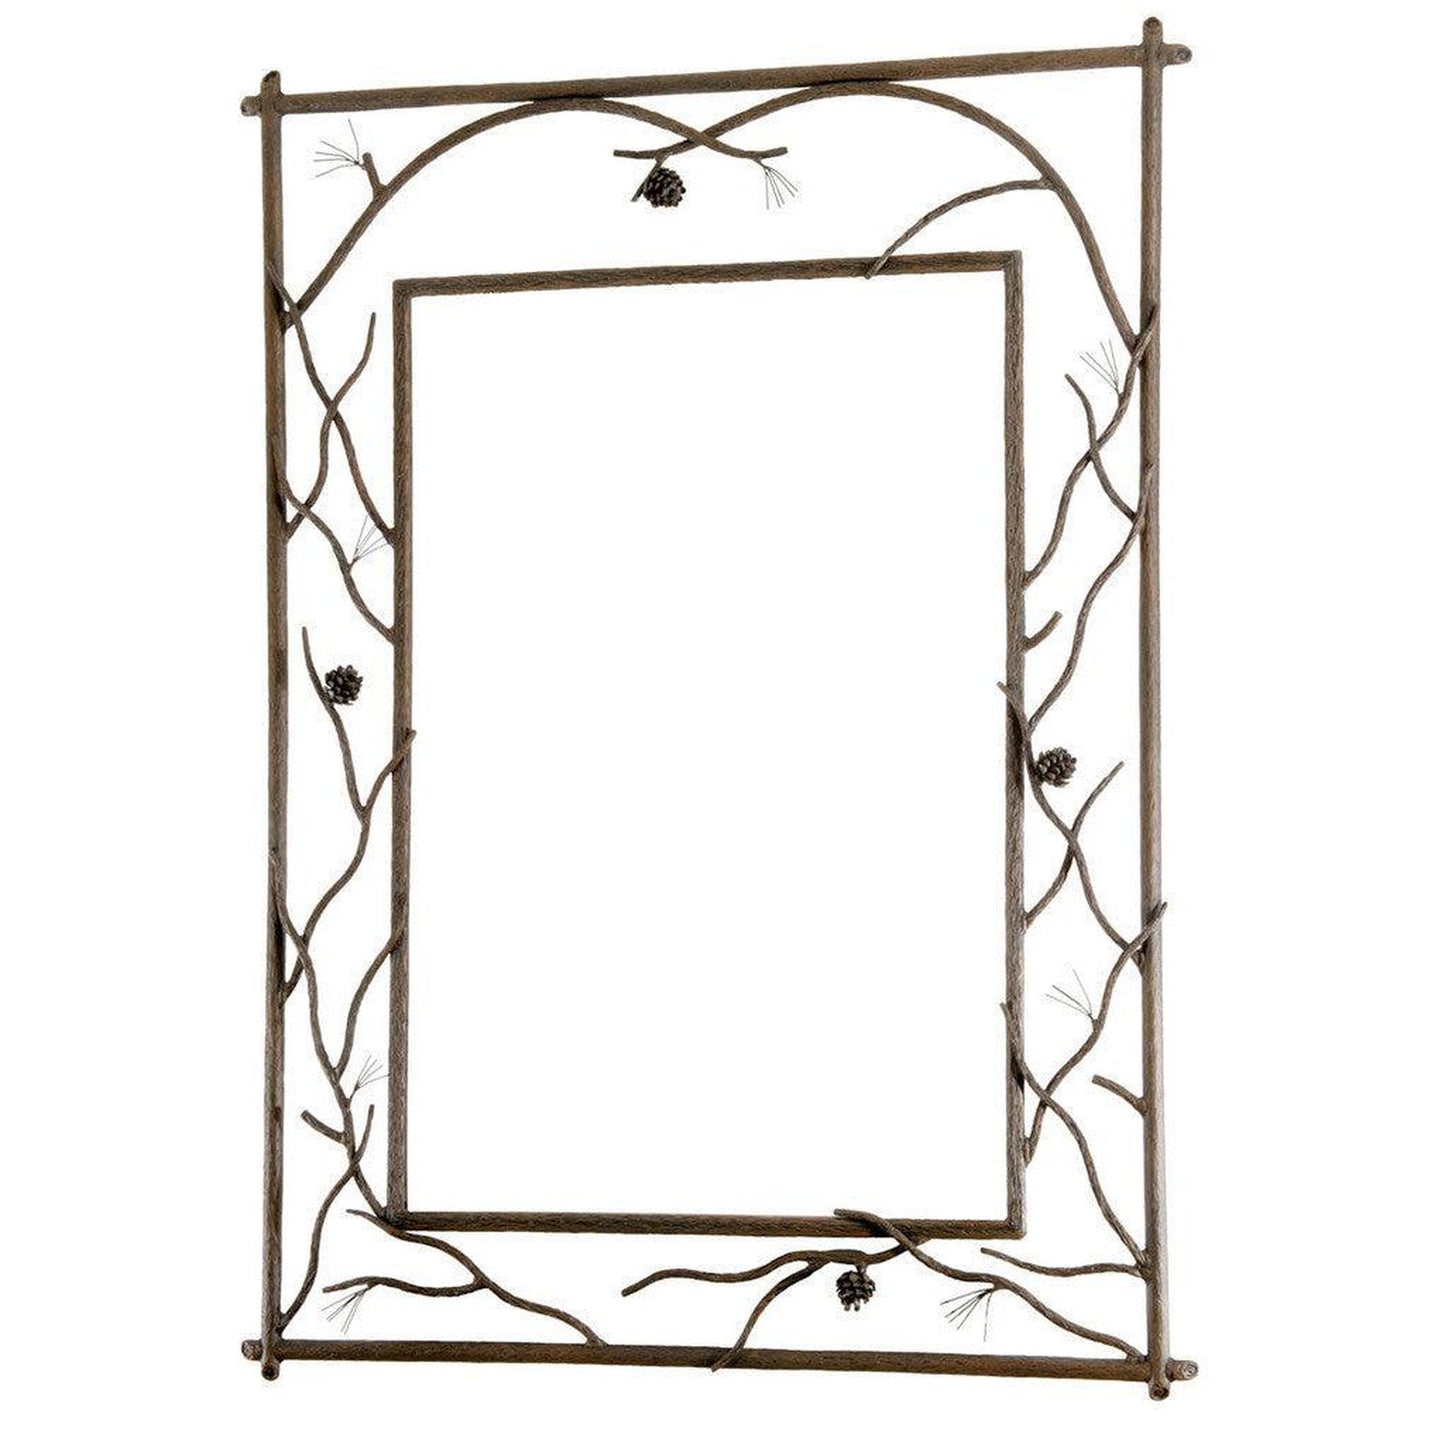 Stone County Ironworks Pine 29" x 35" Small Natural Bark Branched Iron Wall Mirror With Copper Iron Accent